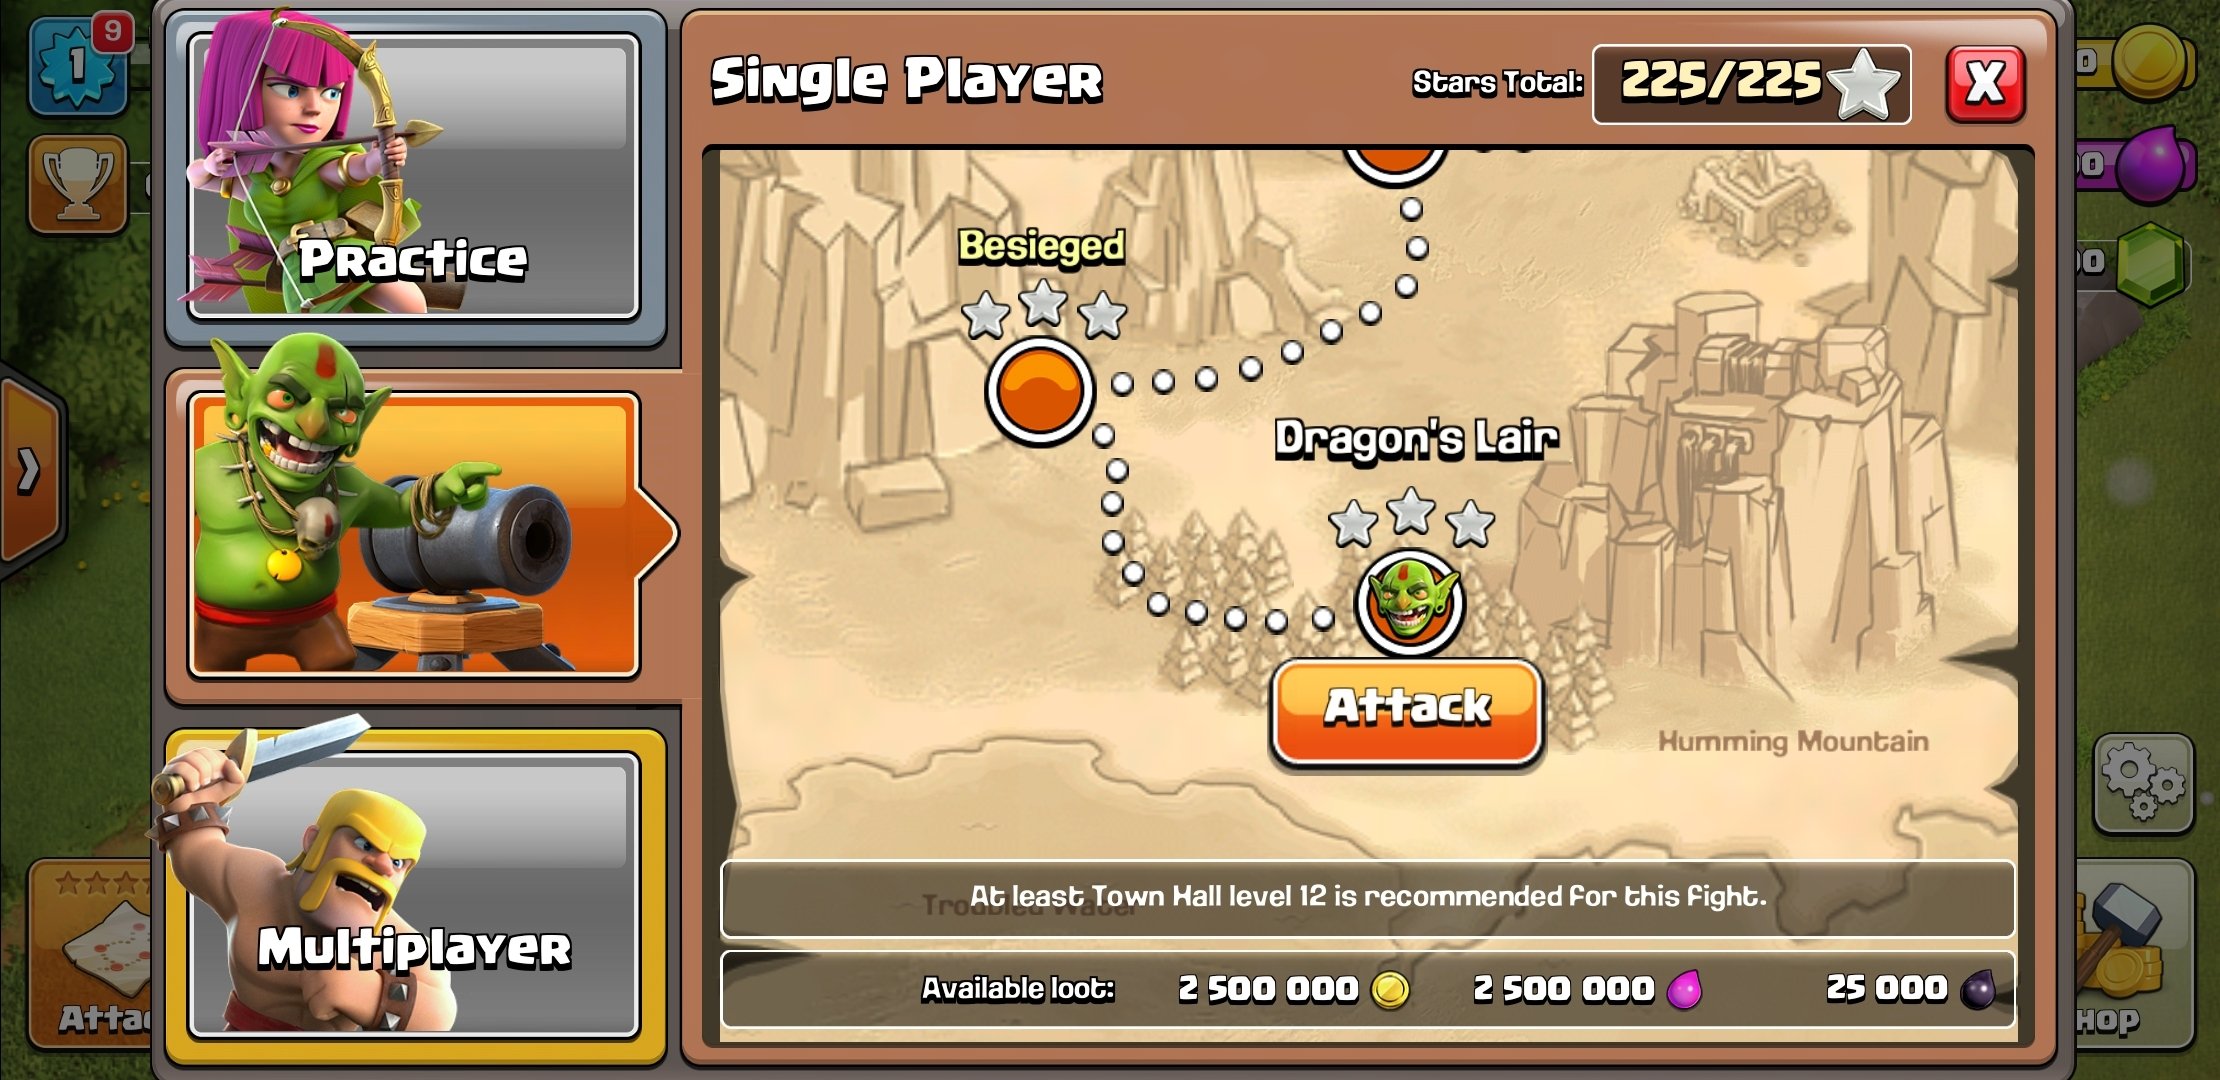 download clash of clans for pc windows 7